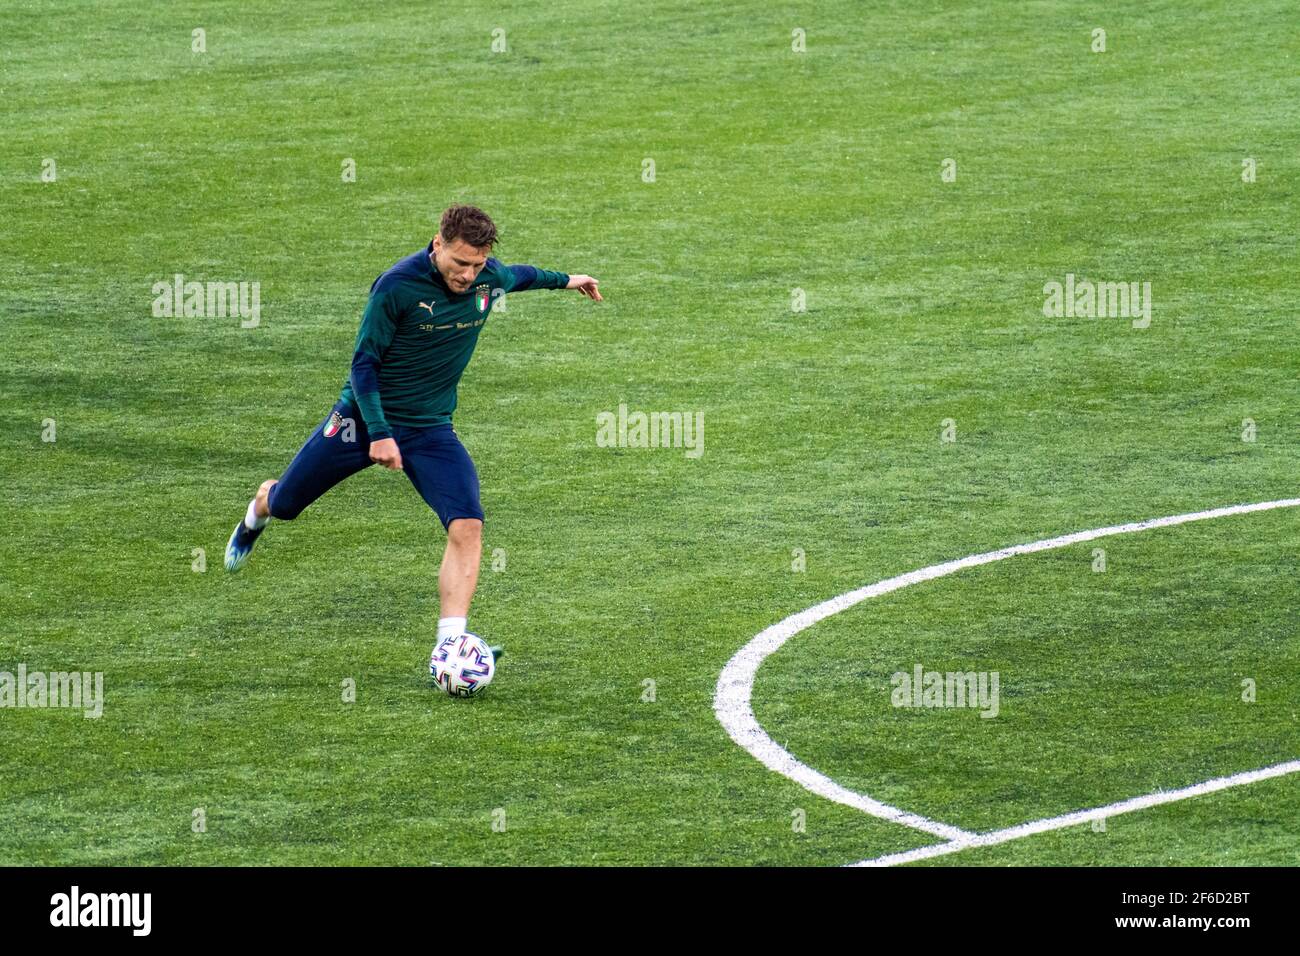 Italian and Lazio player Ciro Immobile during the training before Lithuania - Italy, Qatar 2022 World Cup qualifying match Stock Photo